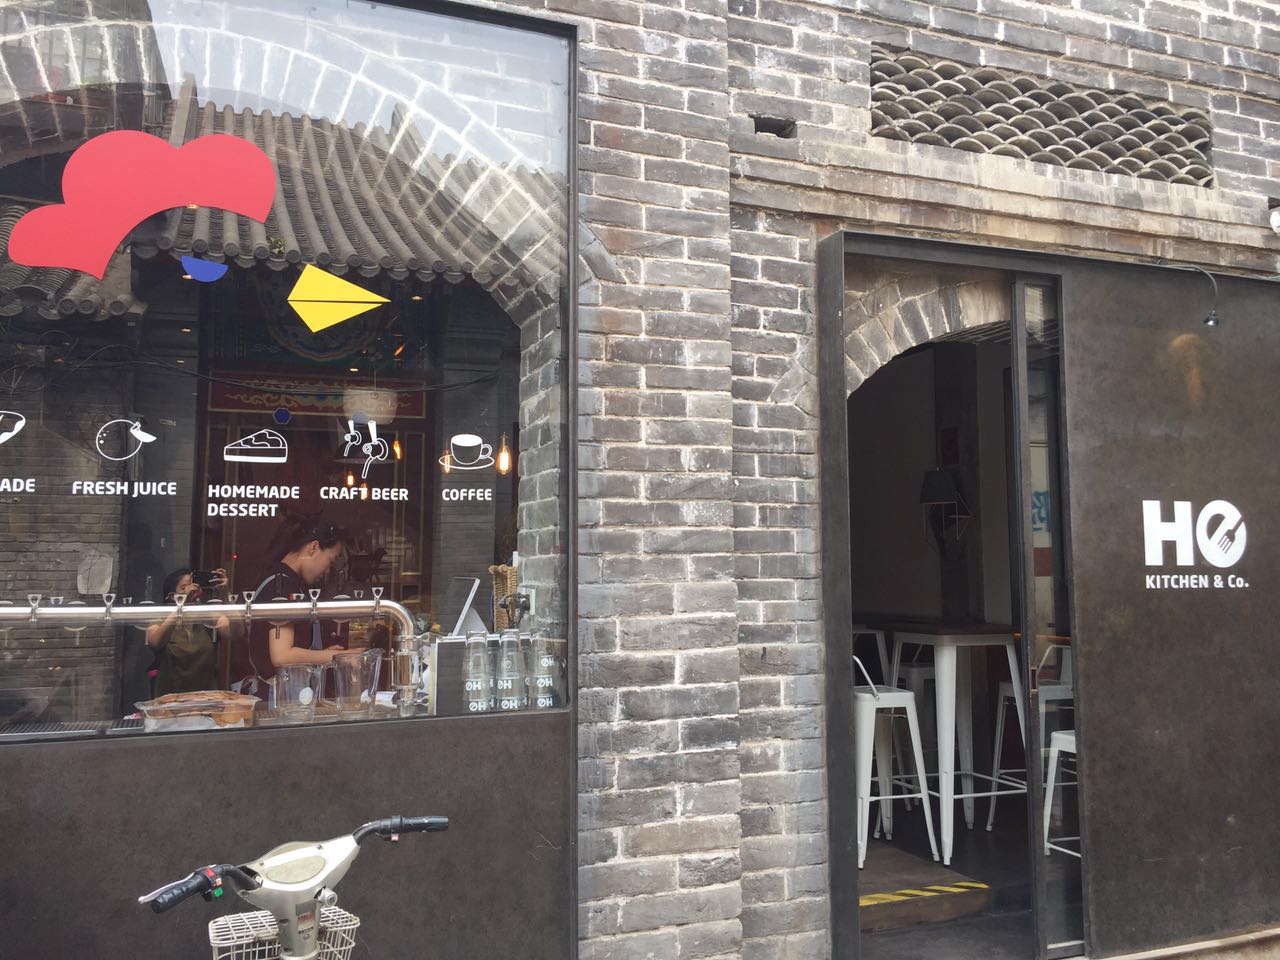 R Burger Brief: Enjoy Tasty Burgers at He Kitchen &amp; Co.&#039;s Ingenious Wudaoying Hutong Space